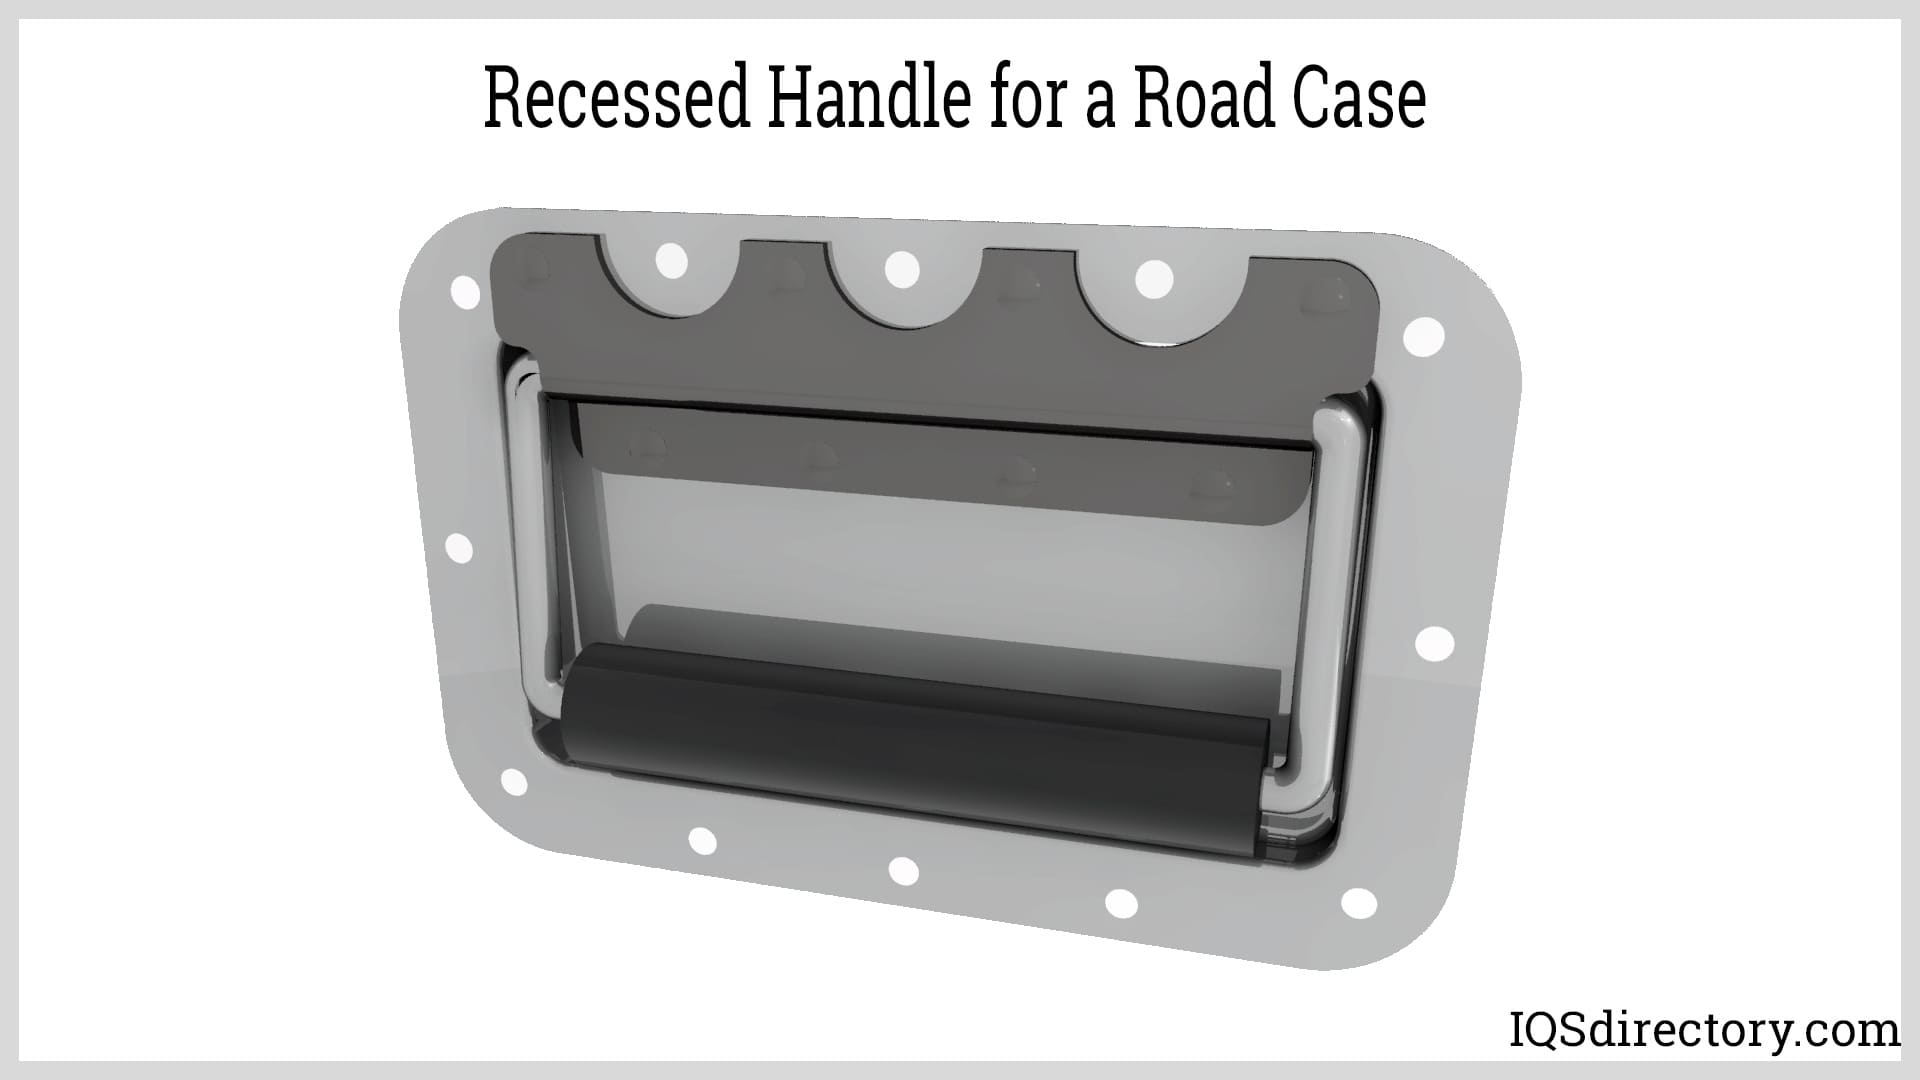 Road Cases: Types, Materials, Applications, and Benefits